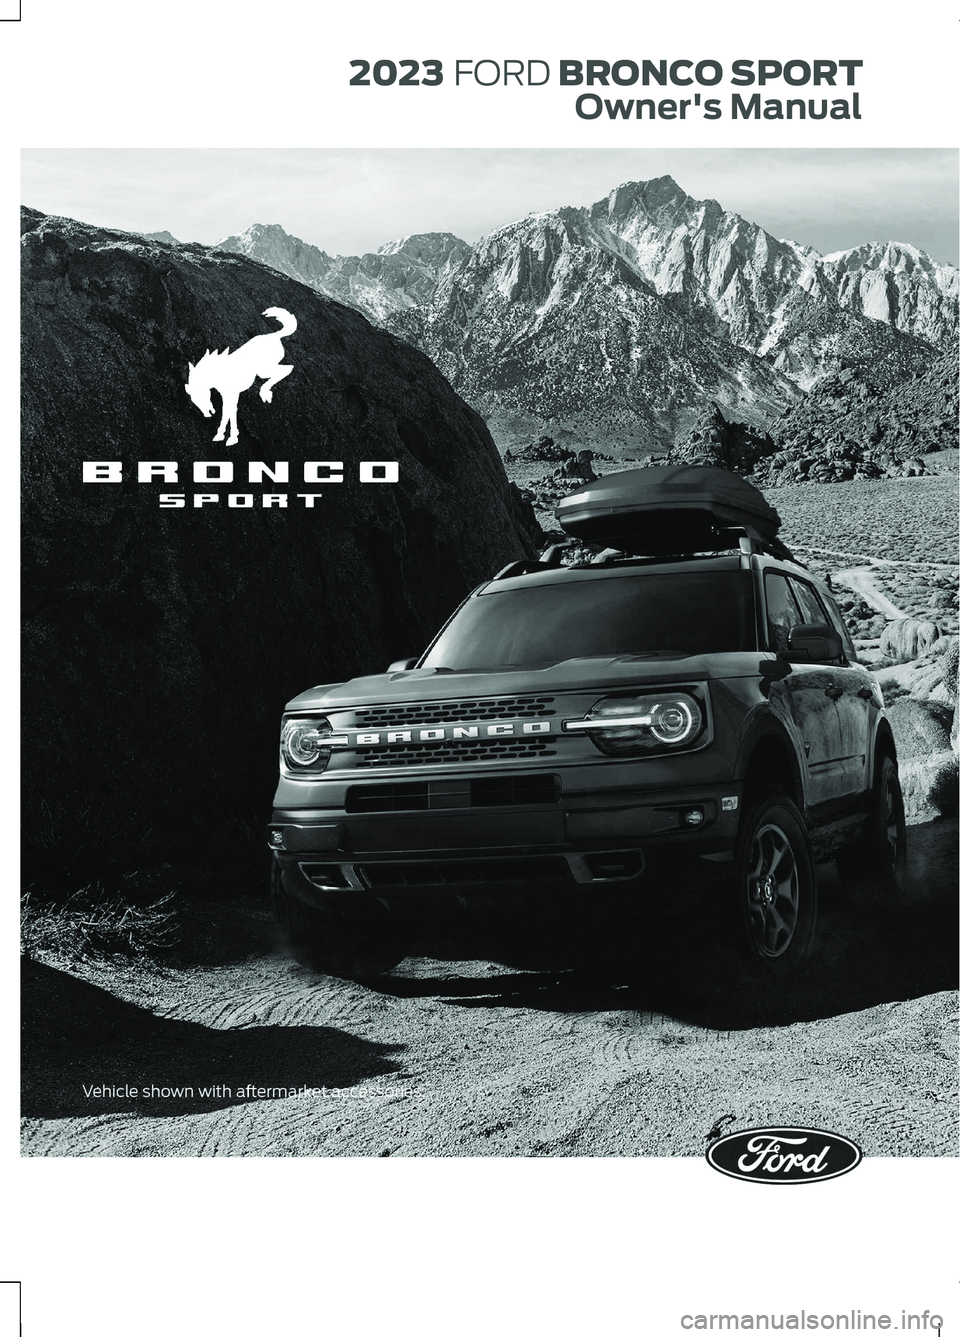 FORD BRONCO SPORT 2023  Owners Manual  2023 FORD BRONCO SPORT
Owner's Manual 